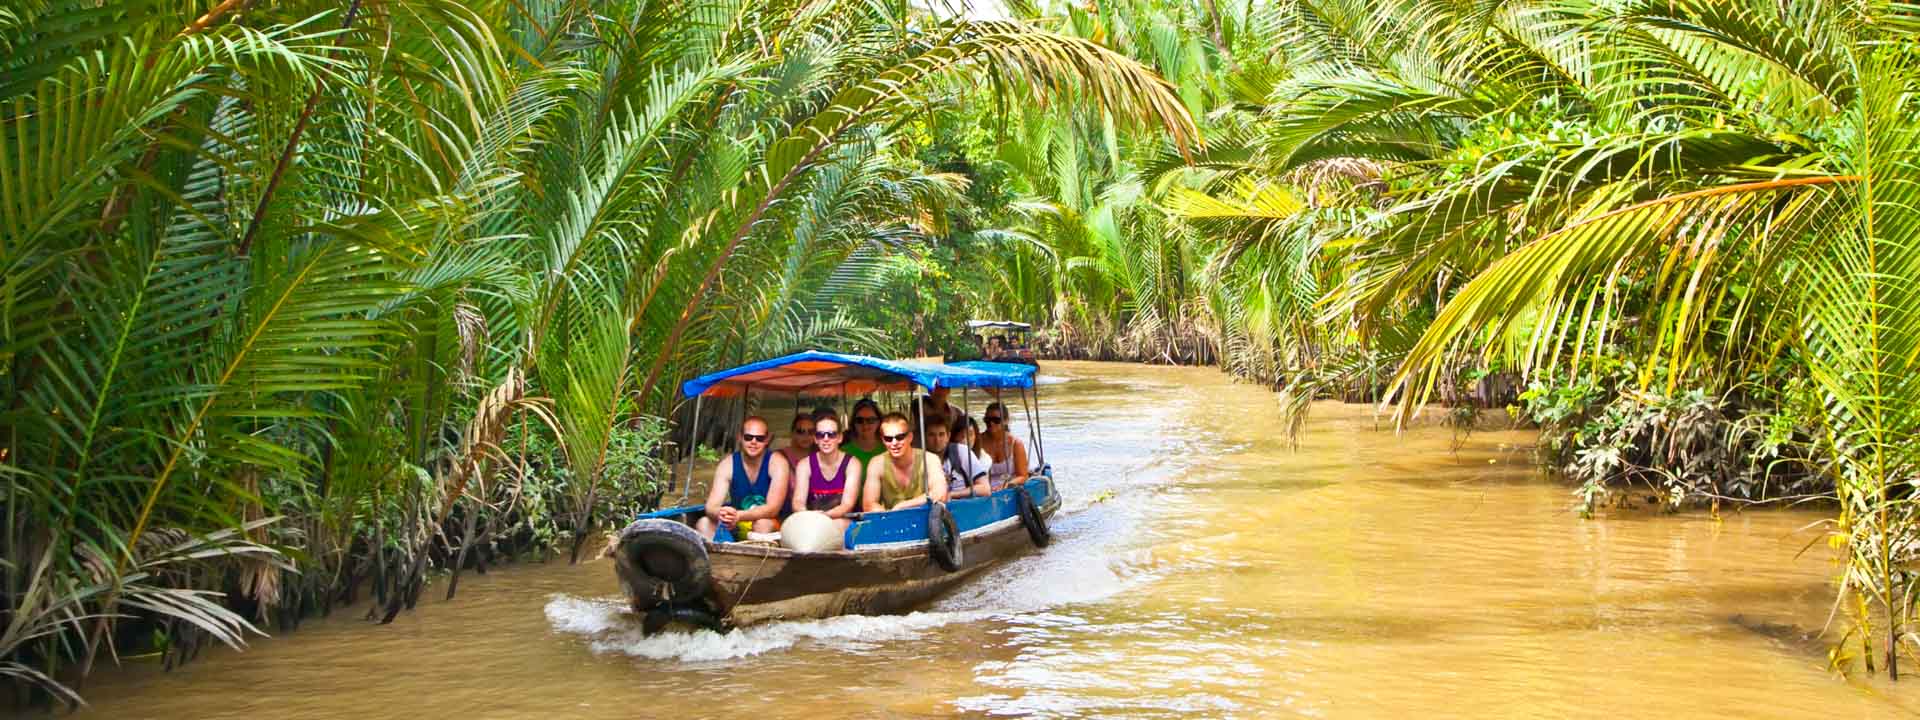 Home Stay in Mekong Delta 2 days